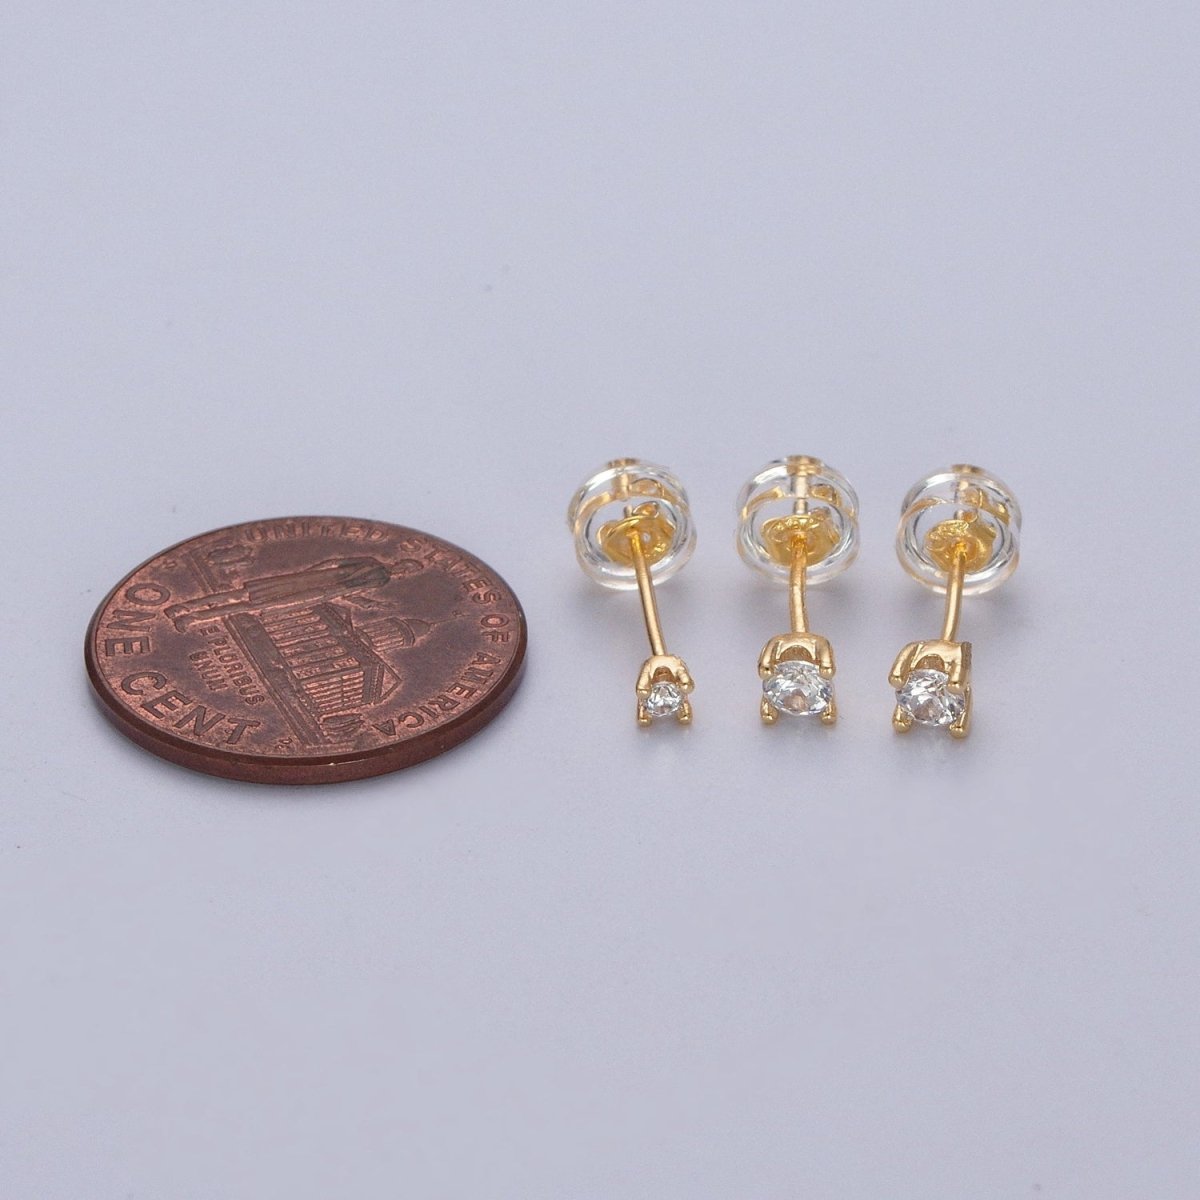 Dainty Gold 3mm, 4mm, 4.4mm Round Clear Cubic Zirconia CZ Stud Earrings P-432 P-433 P-434 - DLUXCA